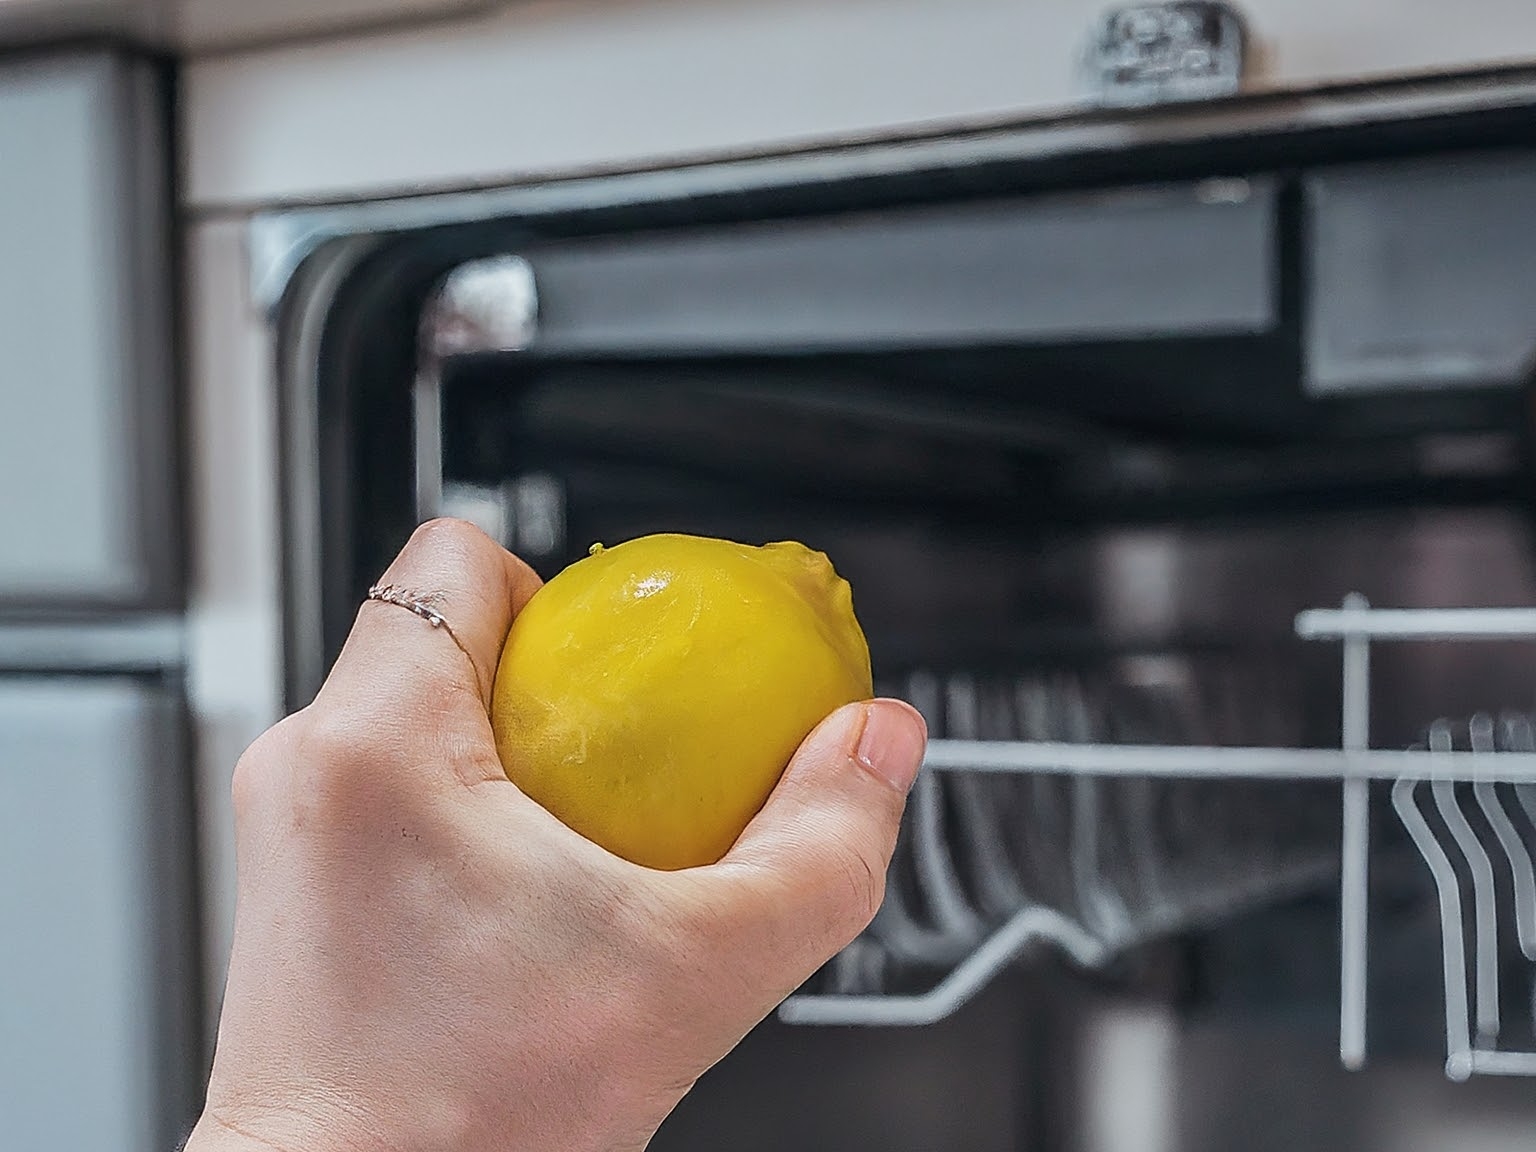 Stainless Steel Kitchen Appliance Cleaning with Half Cut Lemon